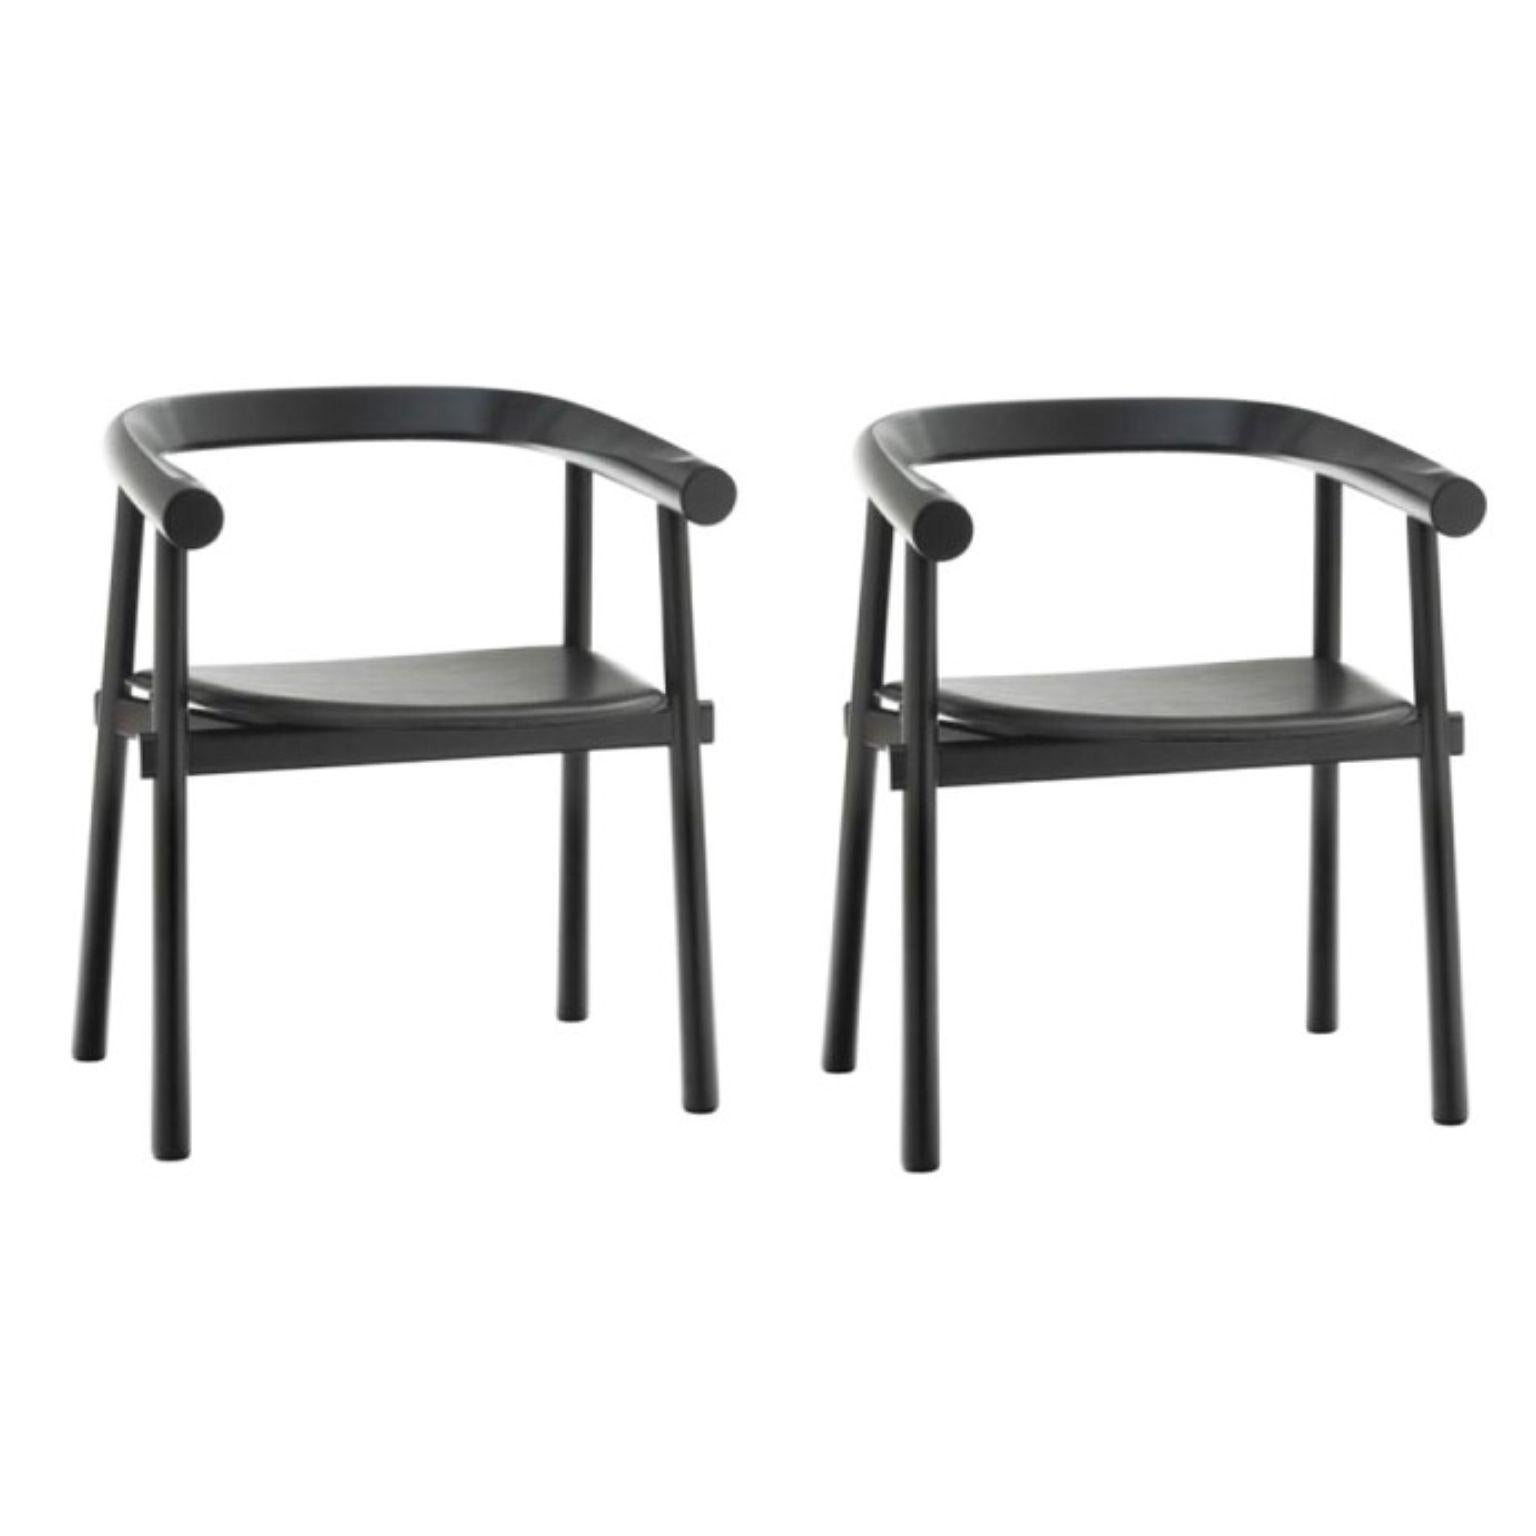 Set of 2 Black Bridge Altay armchairs by Patricia Urquiola
Materials: Structure in natural solid beech varnished or black lacquered. Seat in full-grain black leather
Technique: Lacquered and black stained wood and natural leather. 
Dimensions: W